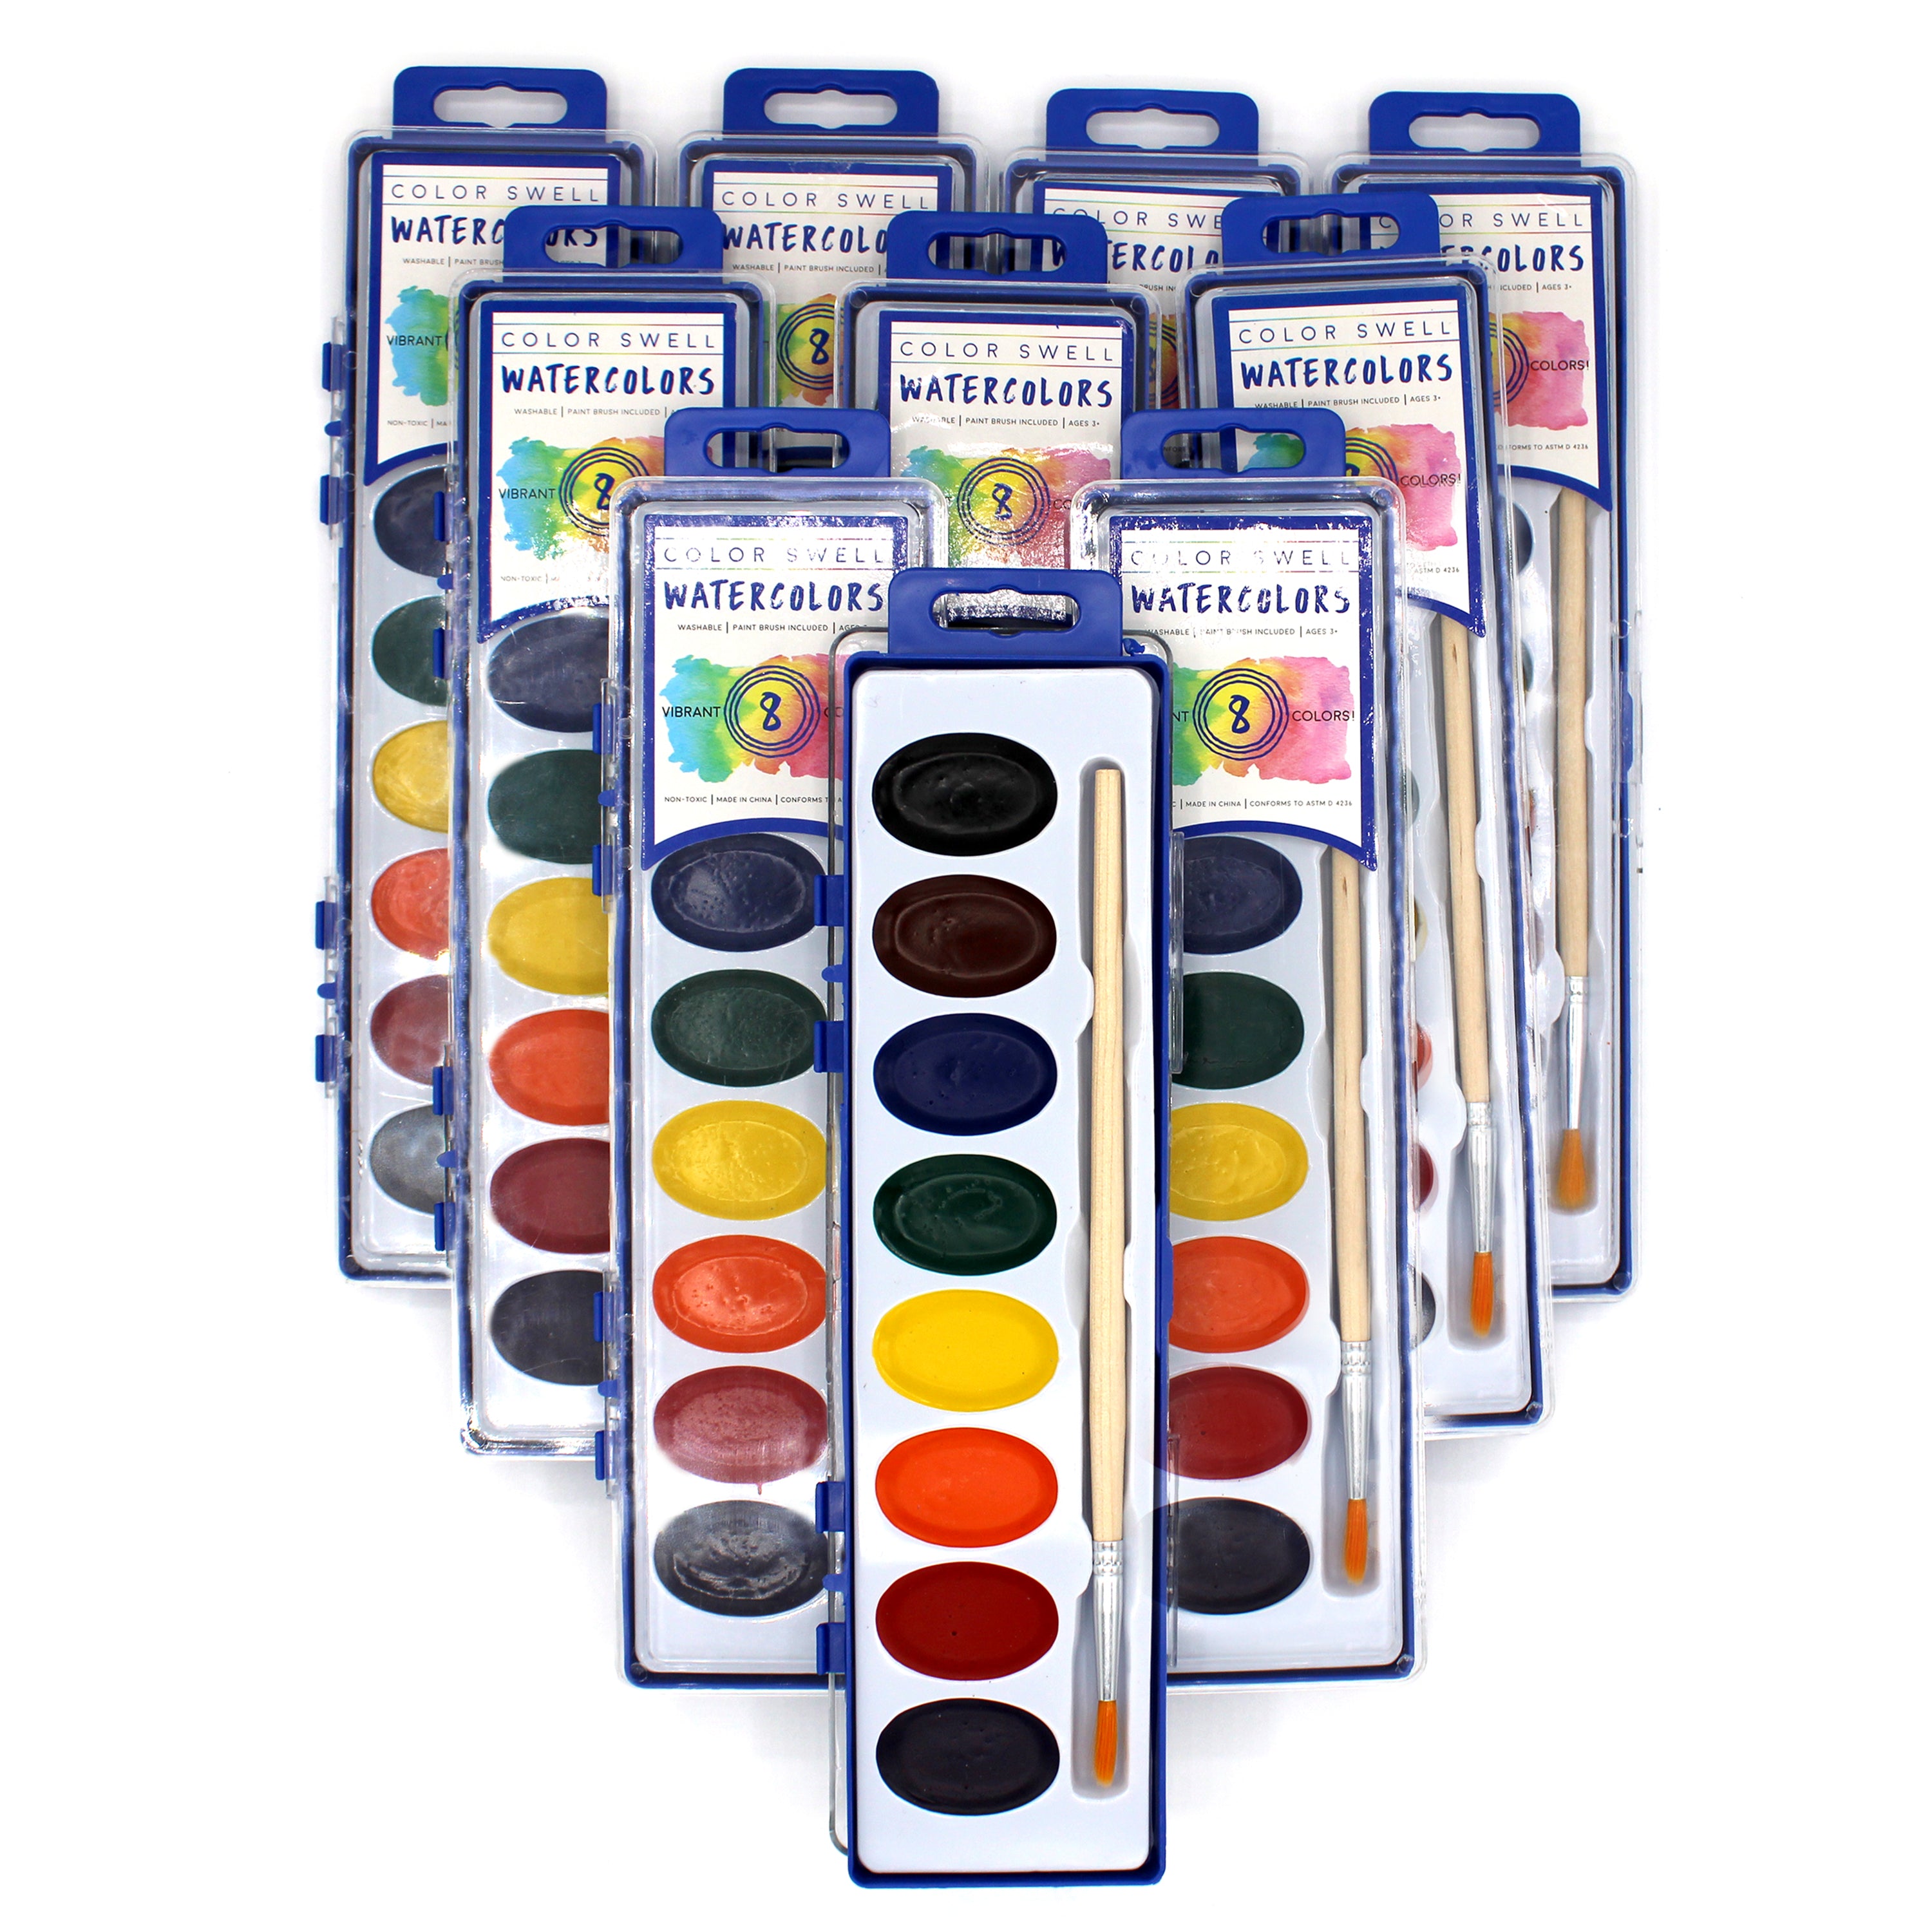  Color Swell 18 Set Watercolor Paint Pack with Wood Brushes 16  Colors Washable Water Colors : Arts, Crafts & Sewing